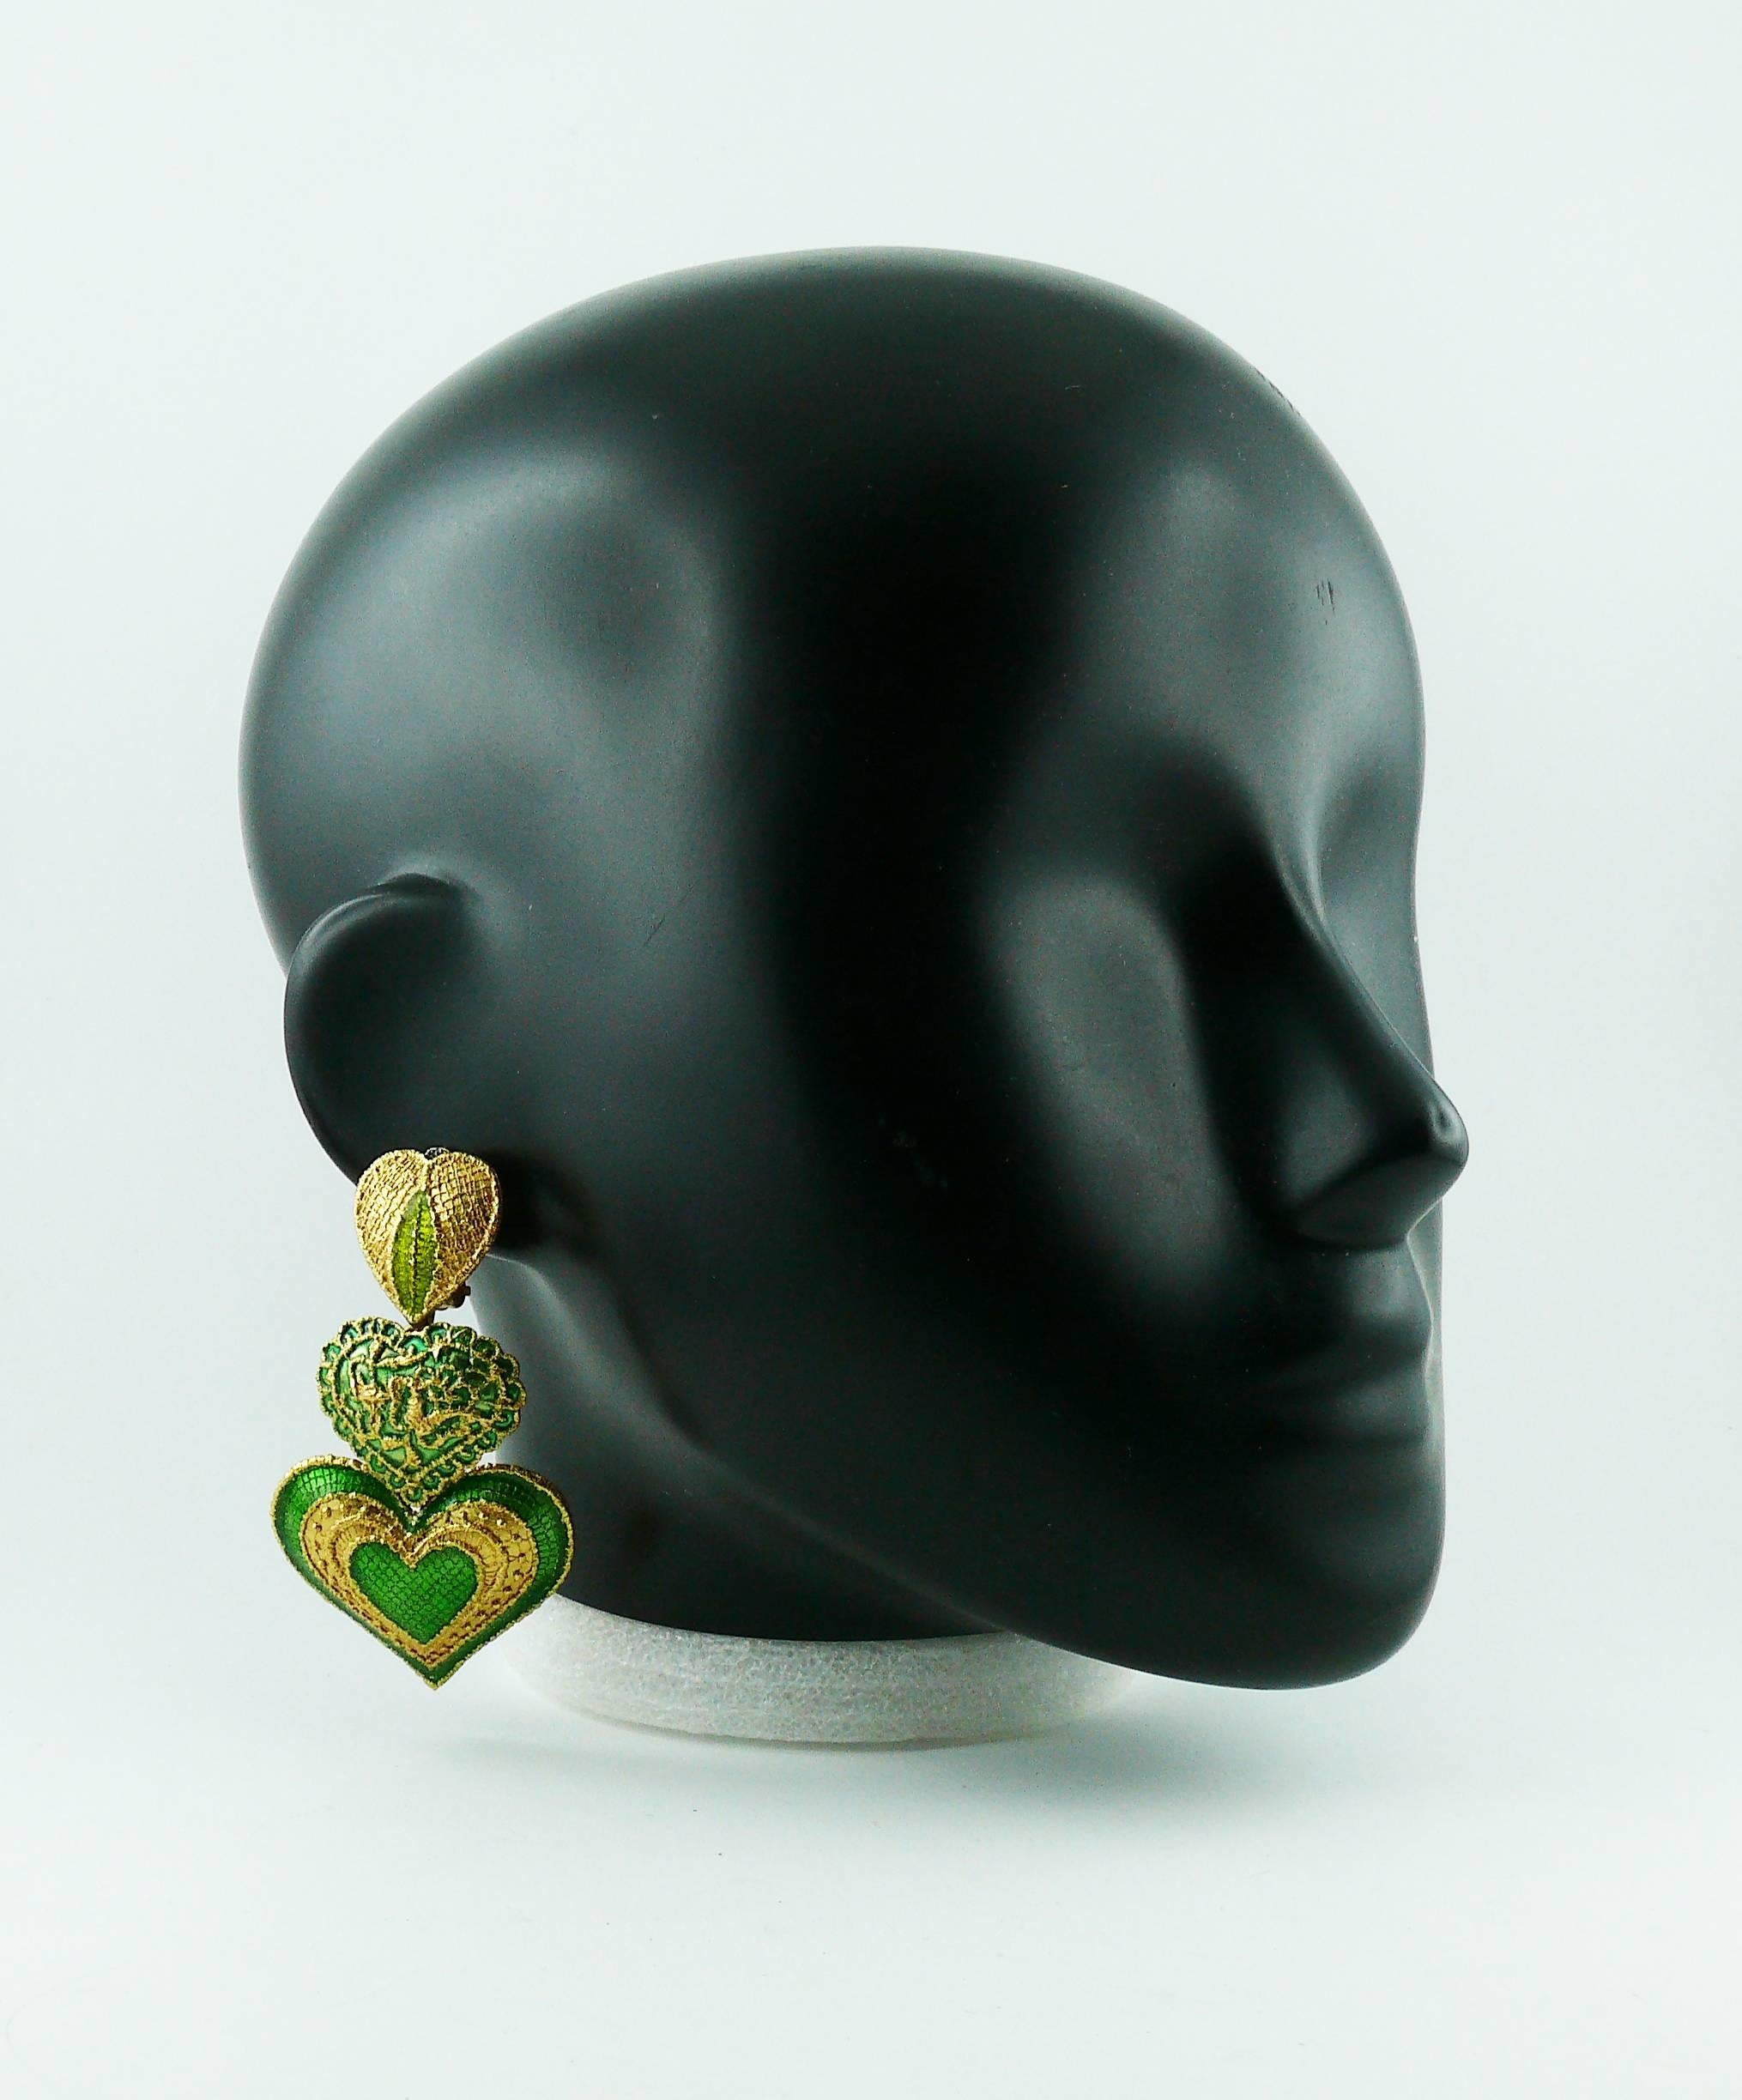 YVES SAINT LAURENT vintage dangling earrings (clip-on) featuring gold toned enamel hearts with a "lace-like" design.

Embossed YSL Made in France.

Indicative measurements : height approx. 7.5 cm (2.95 inches) / max. width approx. 4.2 cm